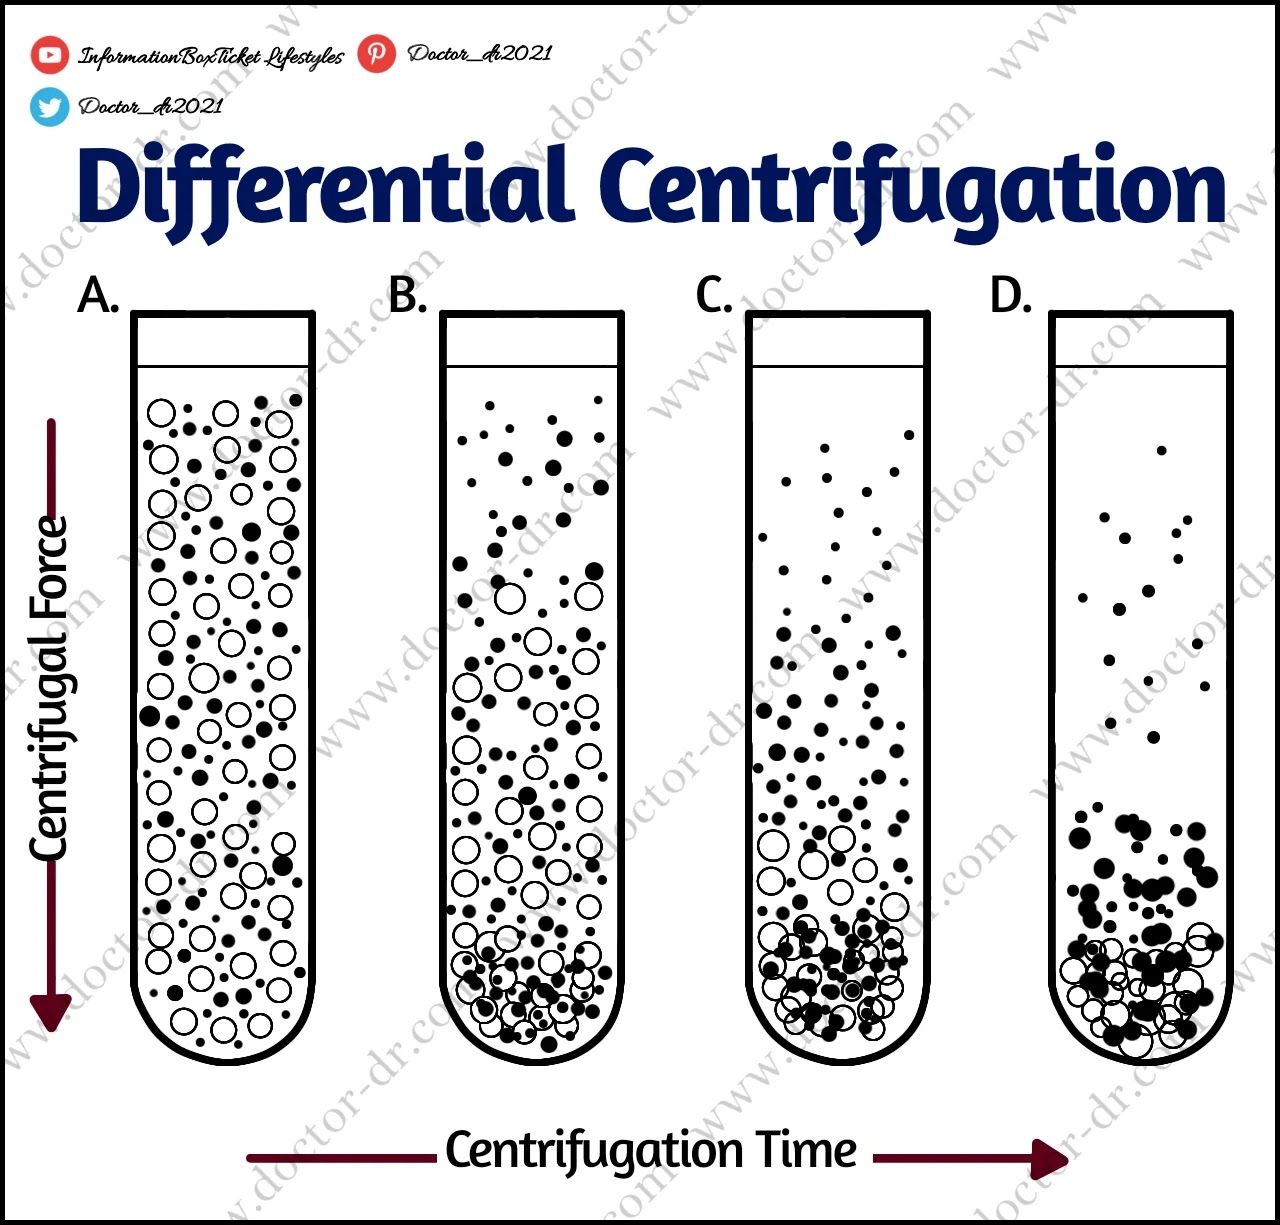 Differential centrifugation It sorts elements by form, size, and density. A suspension of particles of various densities or sizes will sediment at different rates, with bigger and denser particles sedimenting faster. A series of pellets holding cells with a declining sedimentation rate will result from a series of increasing centrifugal force cycles on a cell suspension.